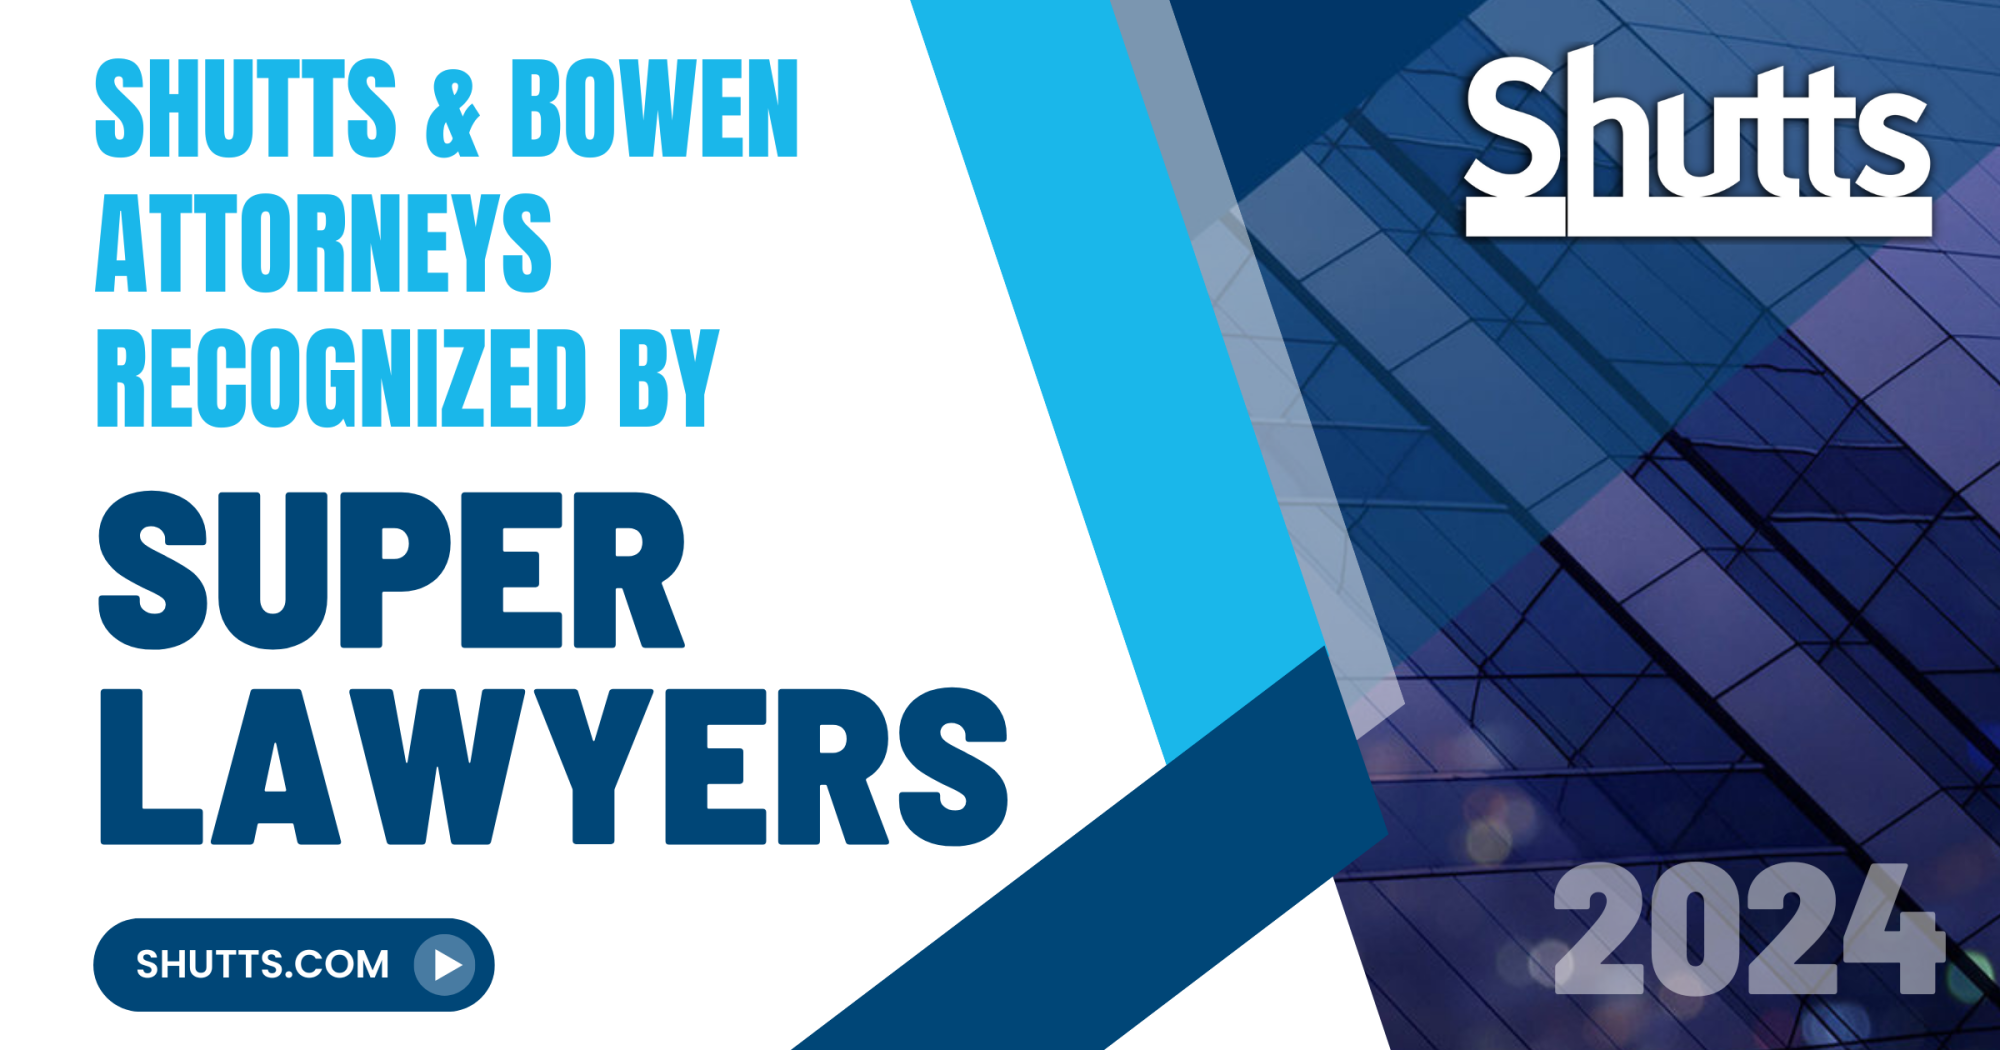 Shutts & Bowen Attorneys Recognized by Super Lawyers 